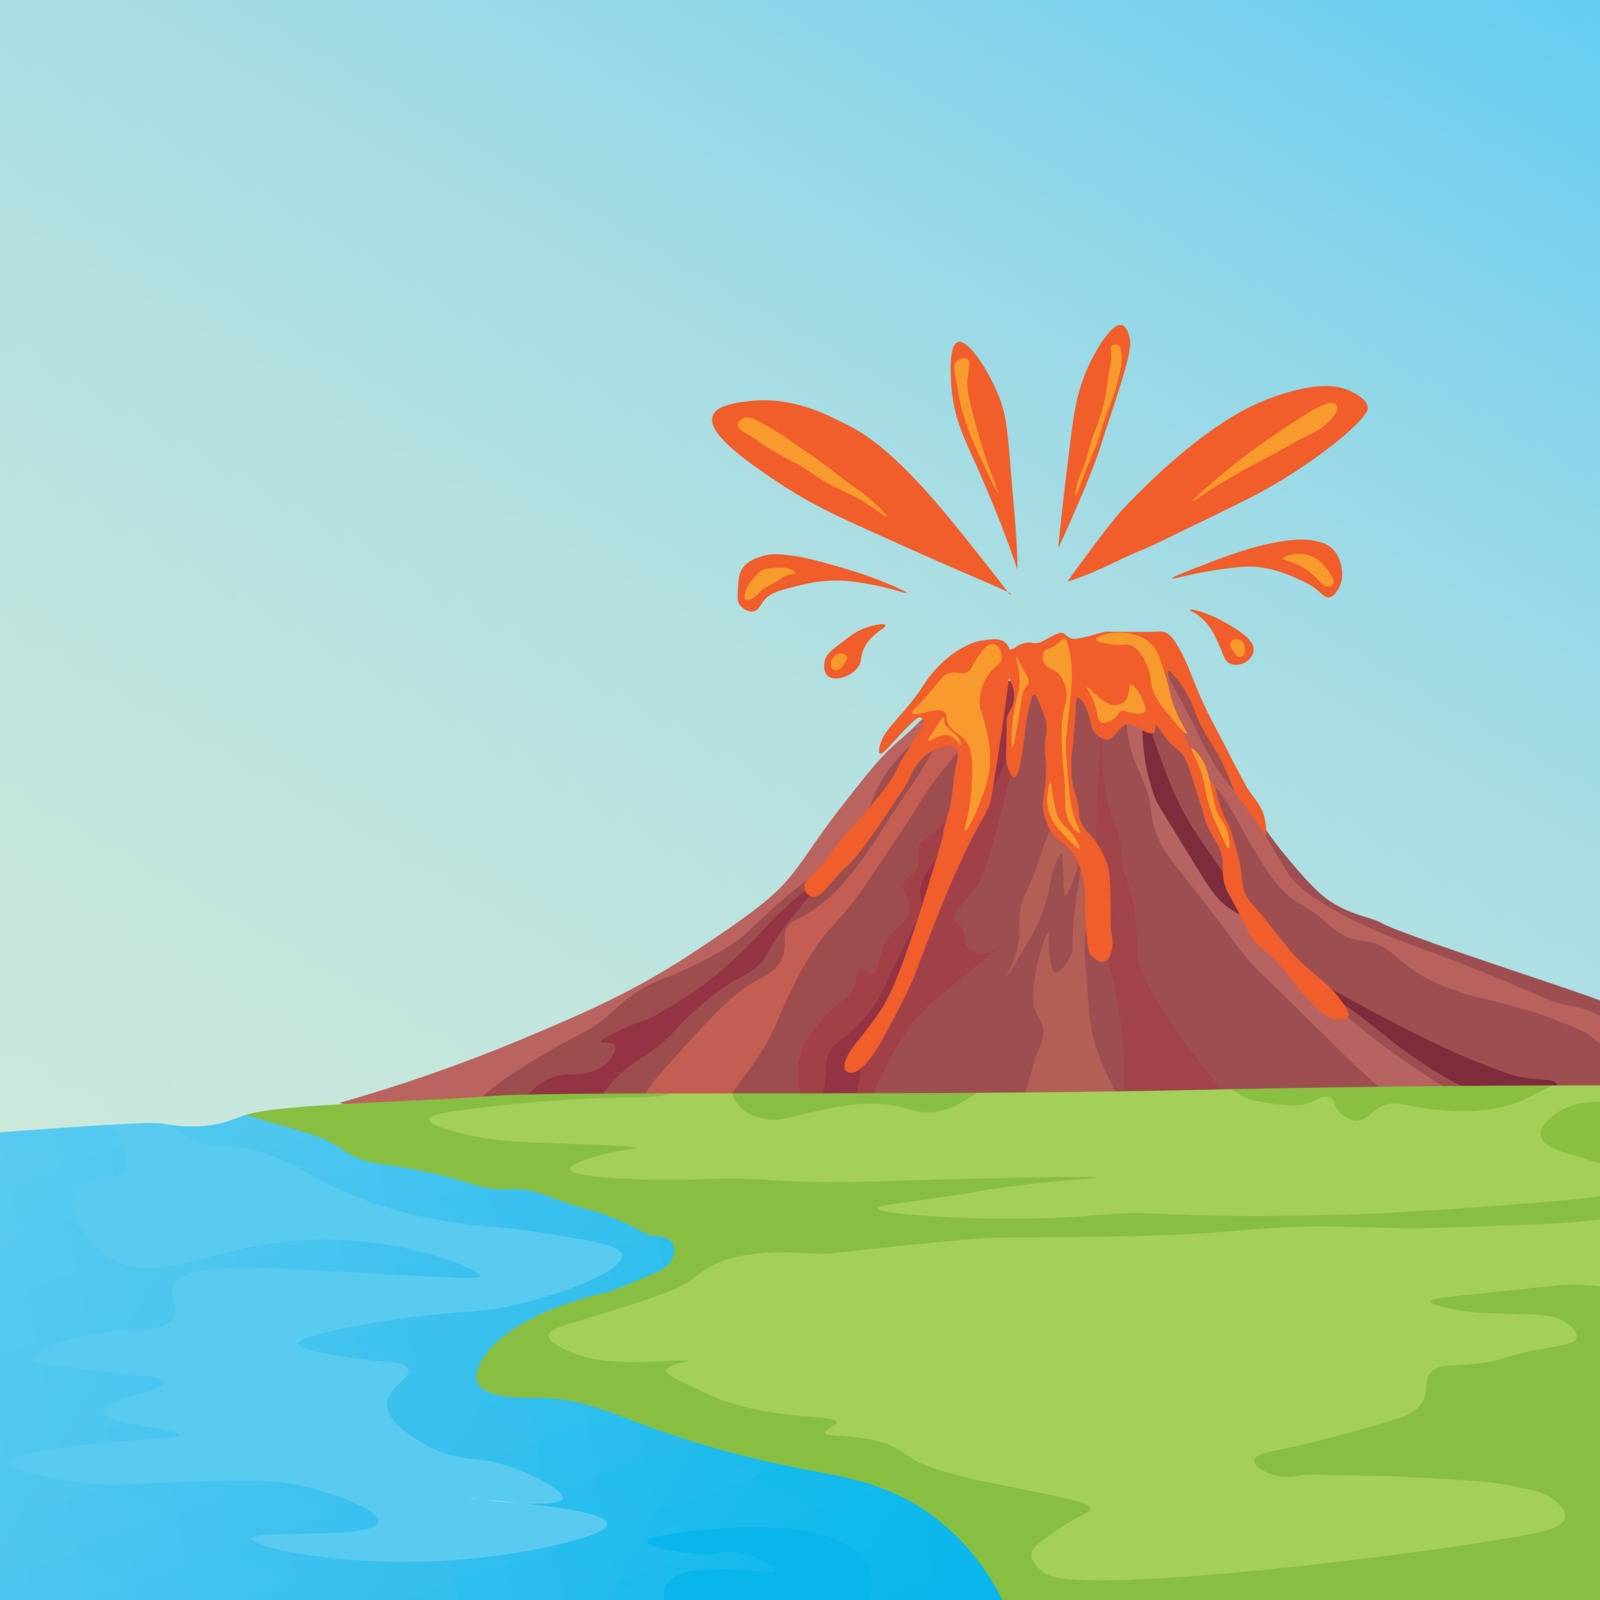 Clip art illustration of tropical island with lava flowing and smoking volcano